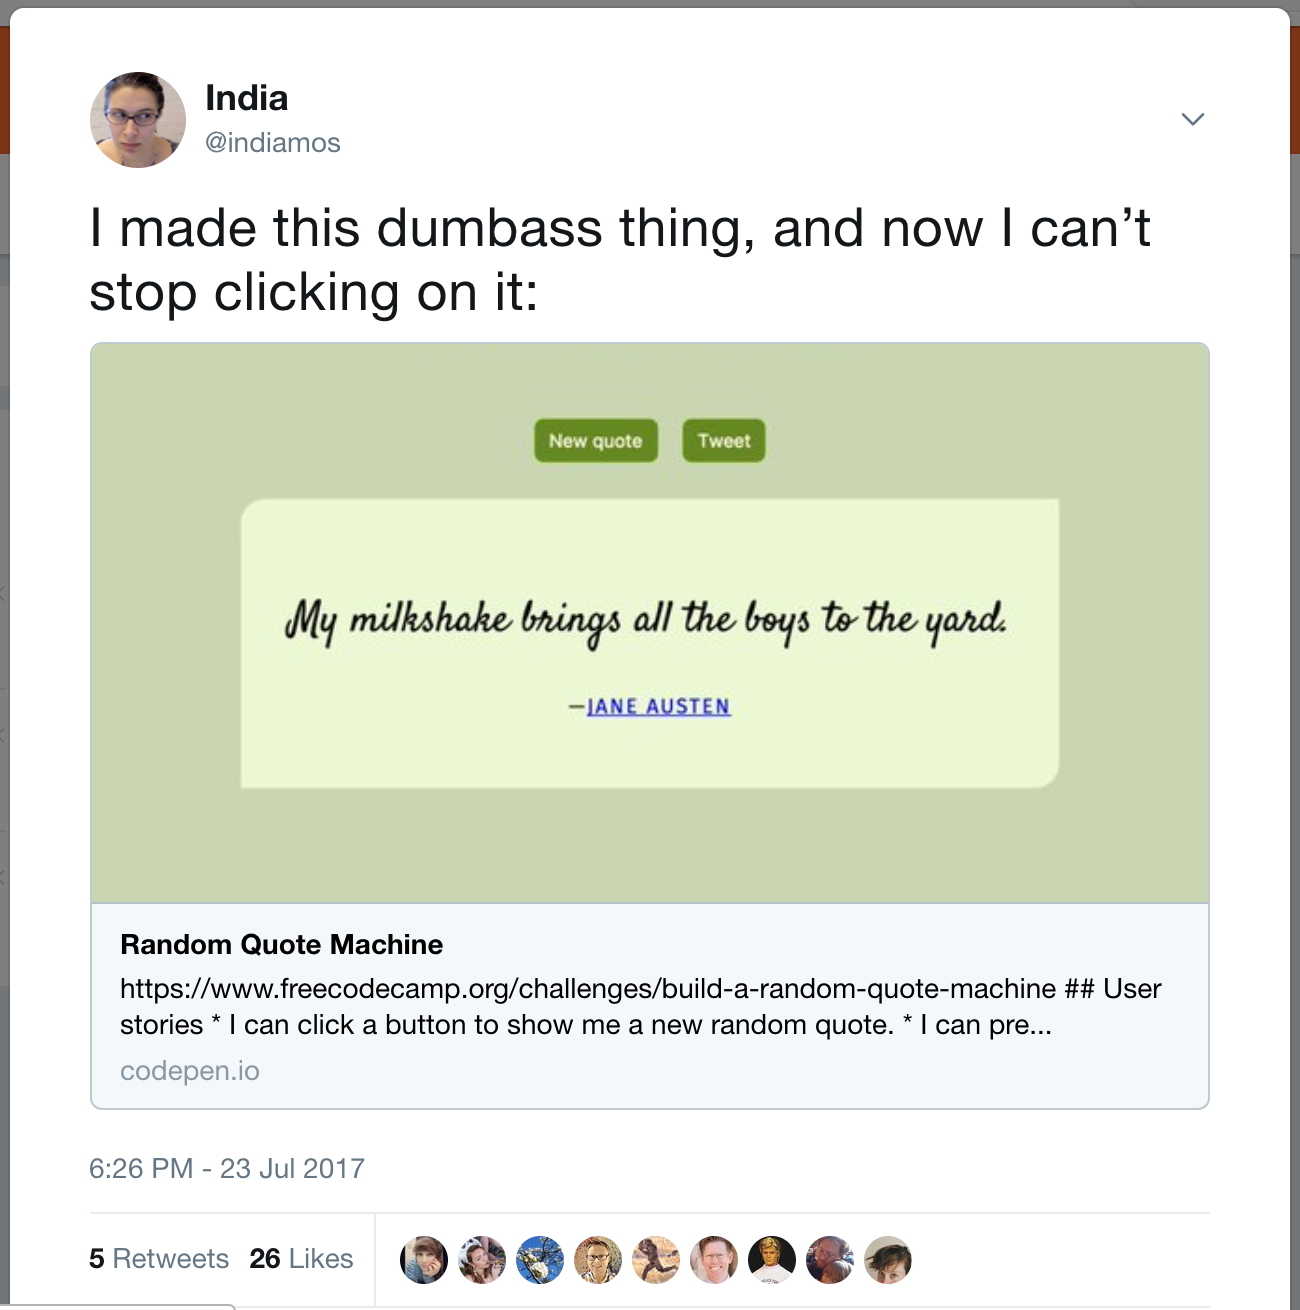 screenshot of my July 2017 tweet linking to the project: “I made this dumbass thing, and now I can’t stop clicking on it”; the featured quote is “My milkshake brings all the boys to the yard.  —Jane Austen”